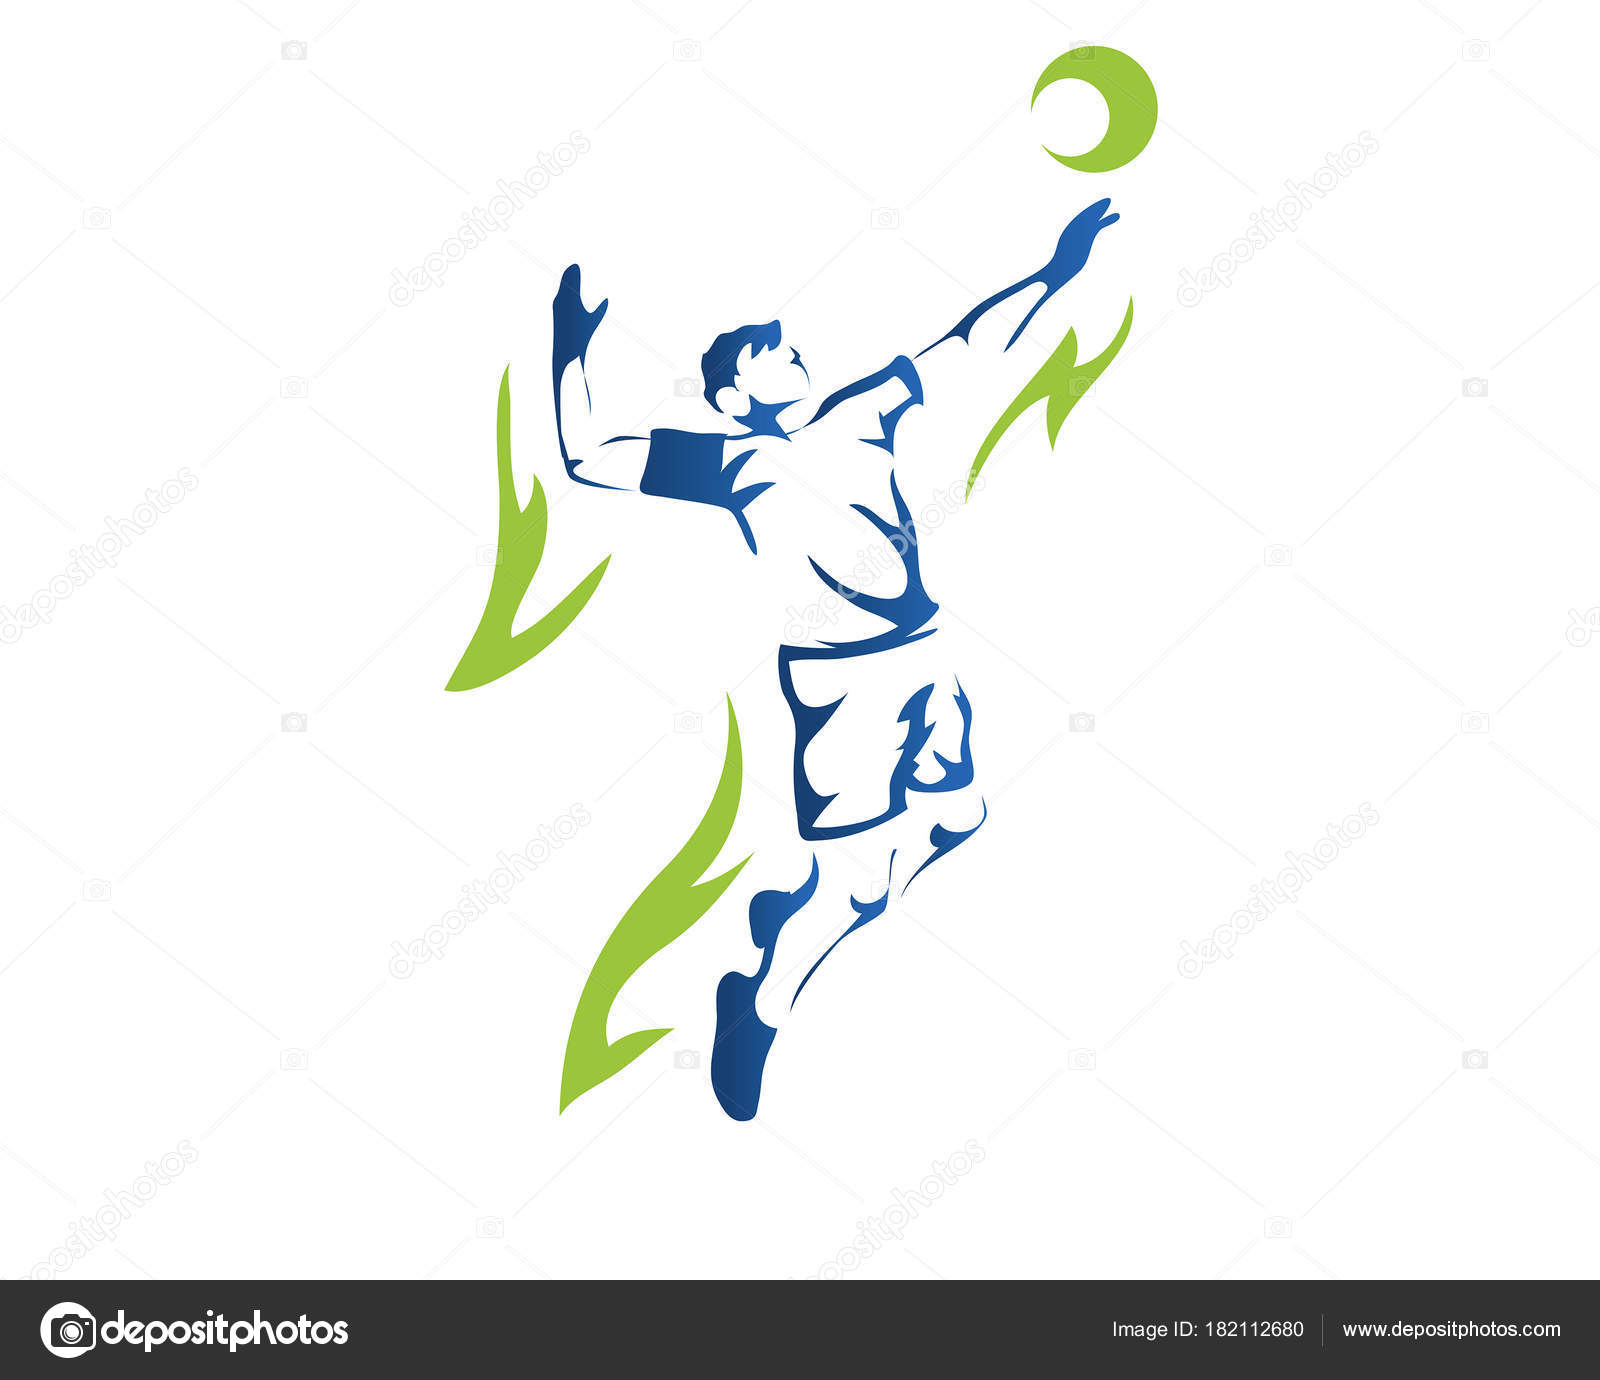 619 Volleyball Spike Logo Images, Stock Photos & Vectors | Shutterstock